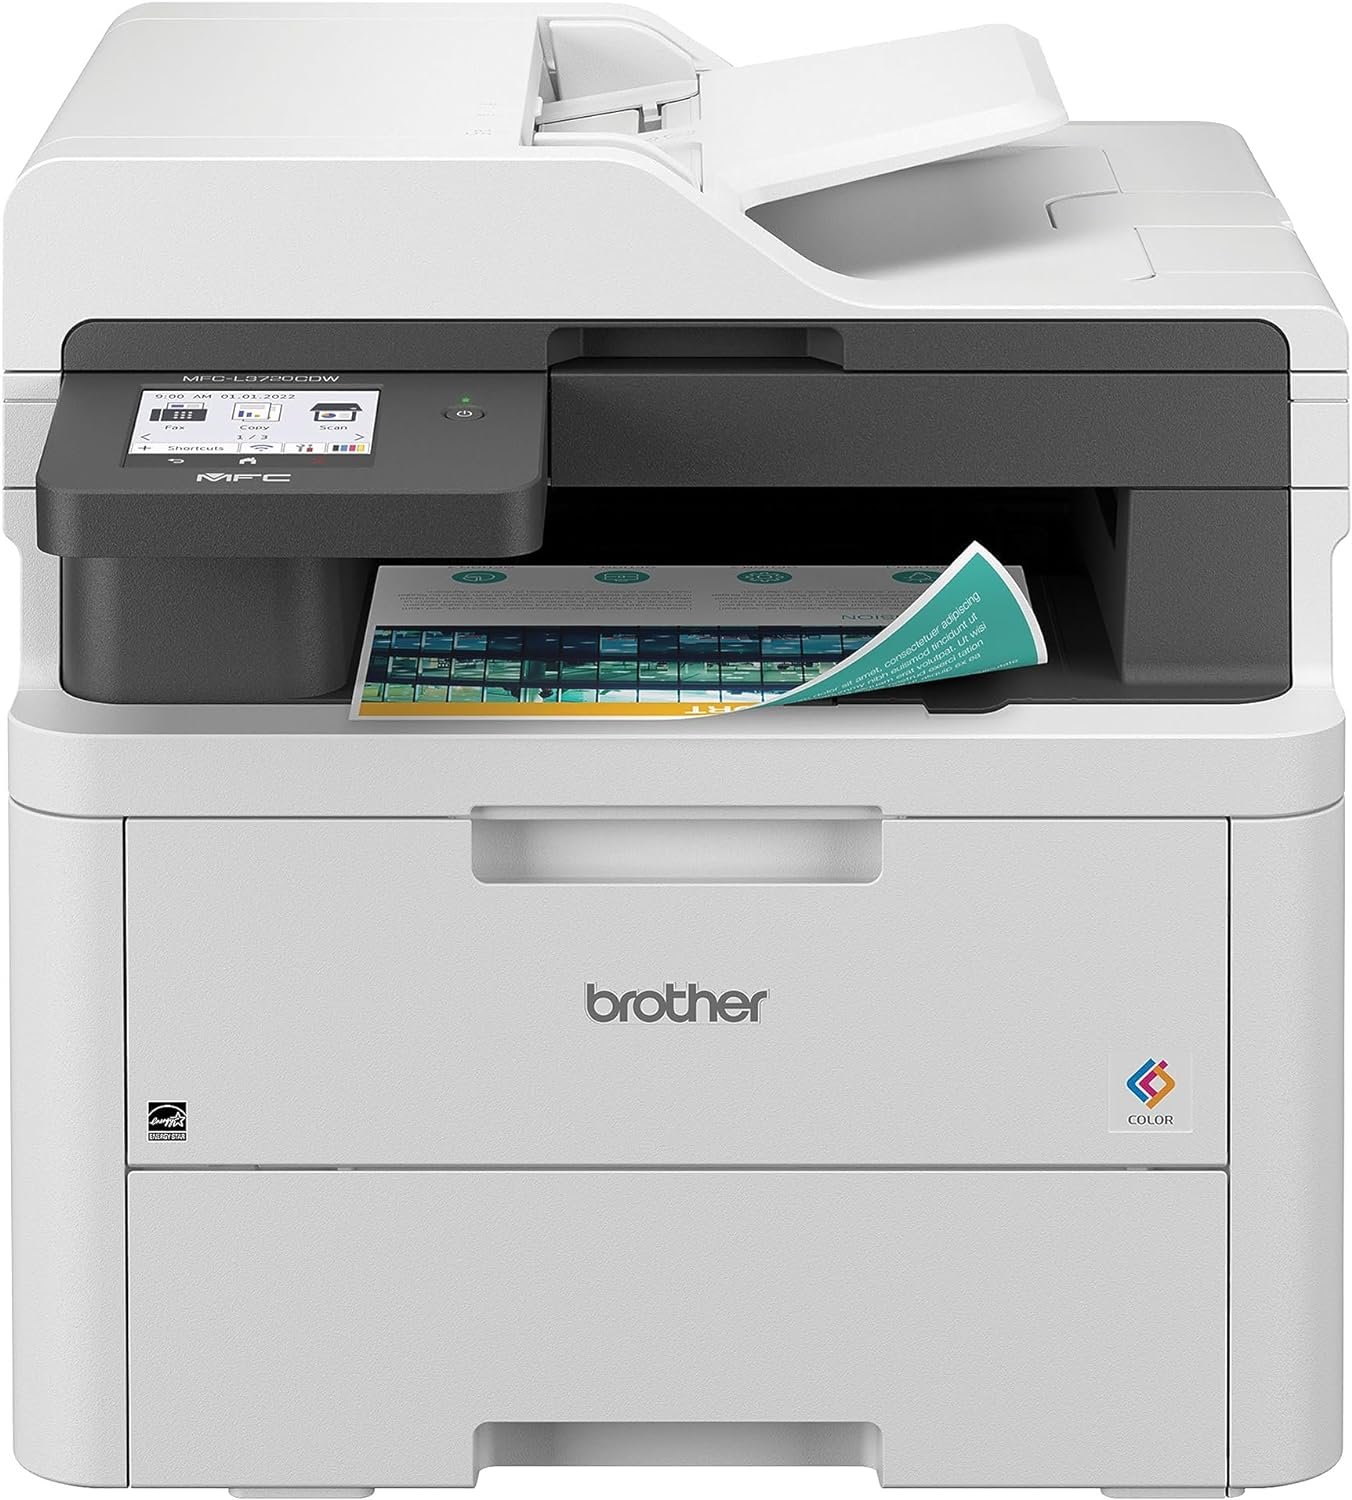 Brother MFC-L3720CDW Wireless Digital Color All-in-One Printer